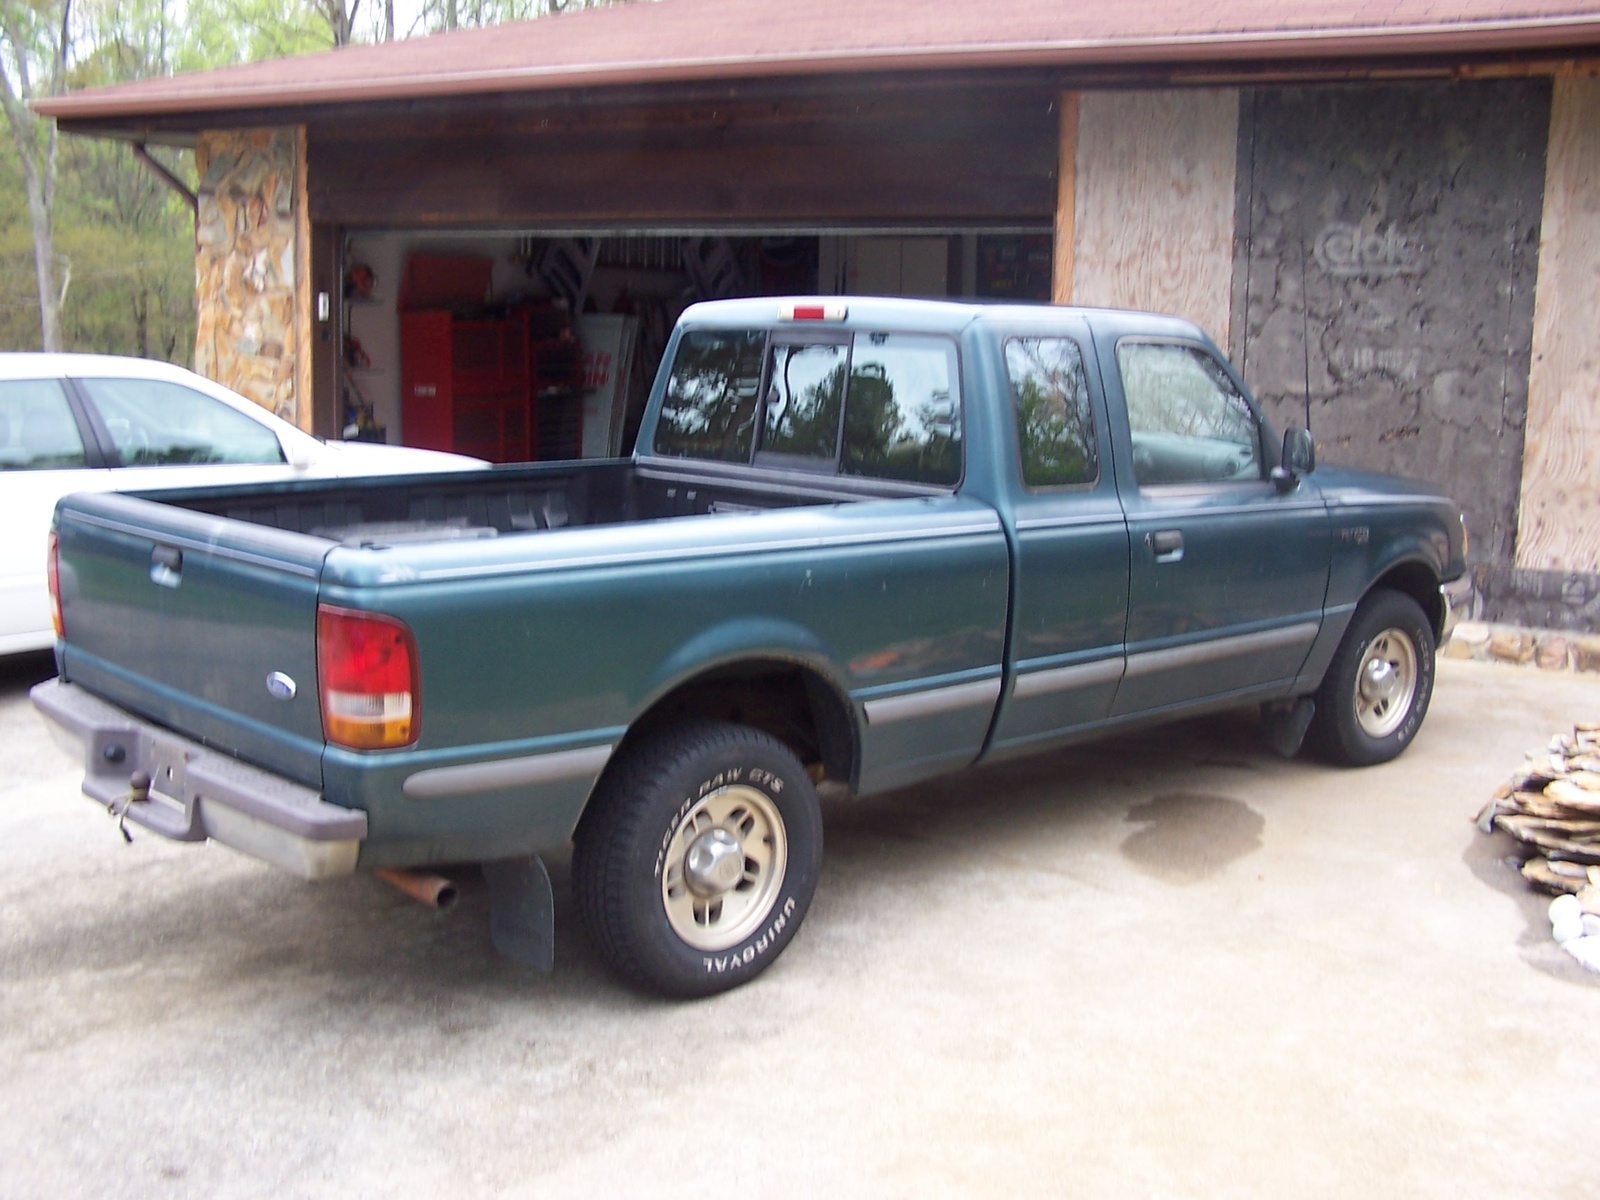 1996 Ford ranger extended cab specifications #1